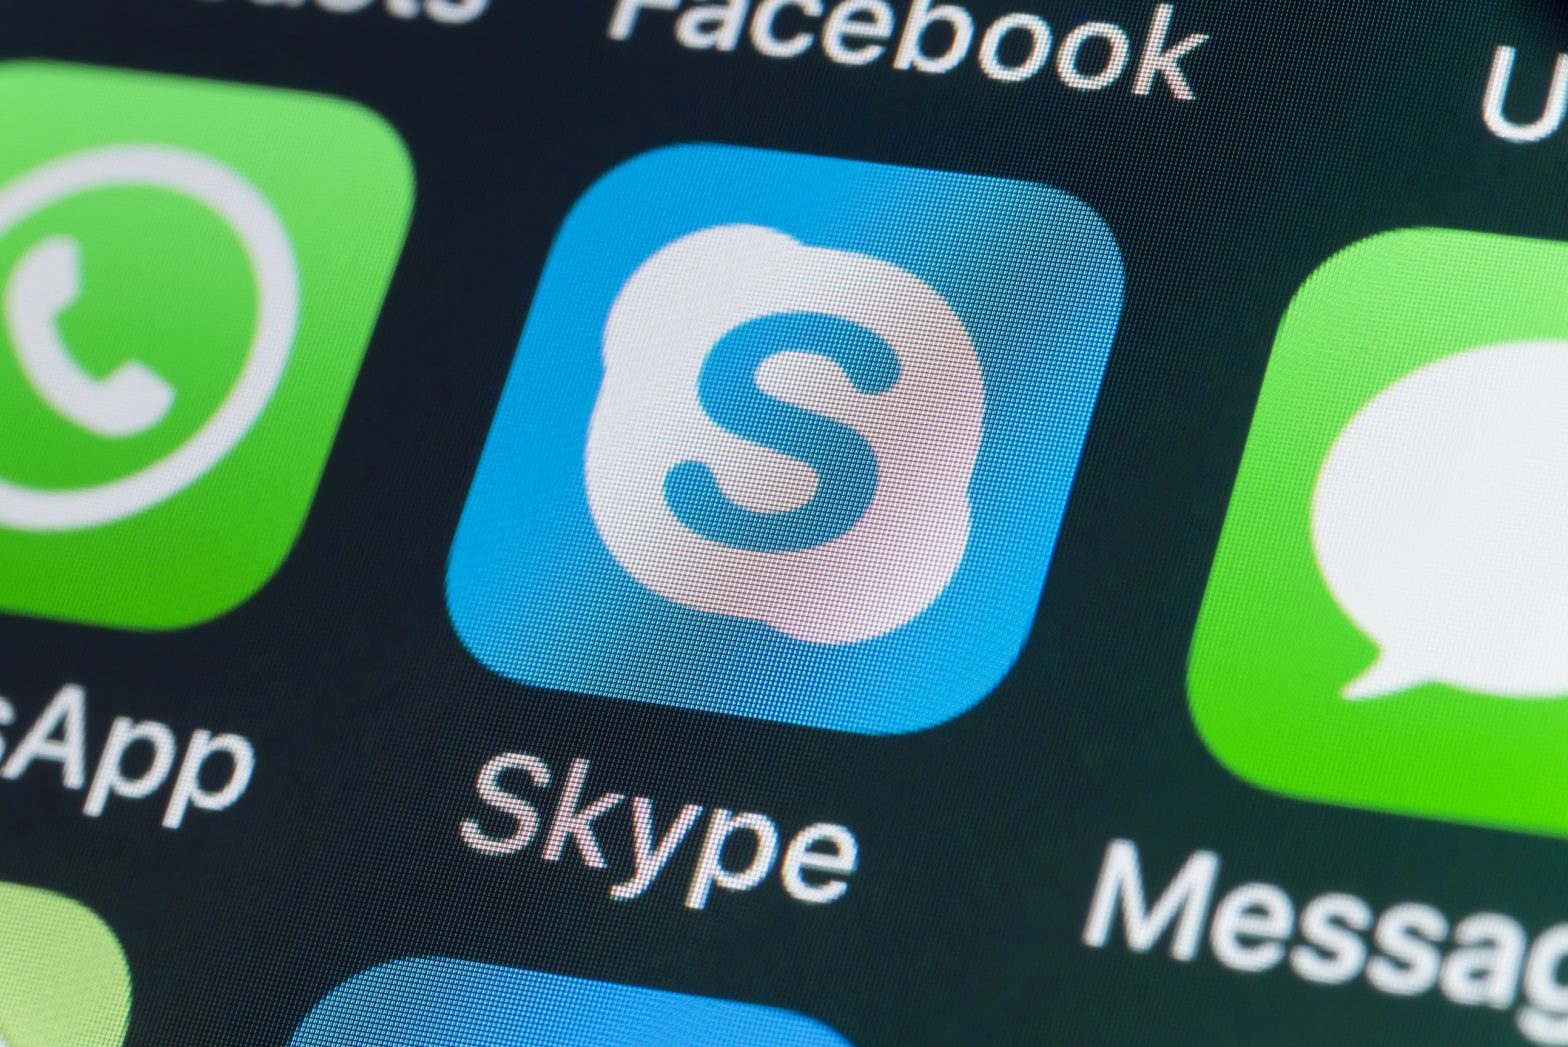 can you use skype for business on a mac